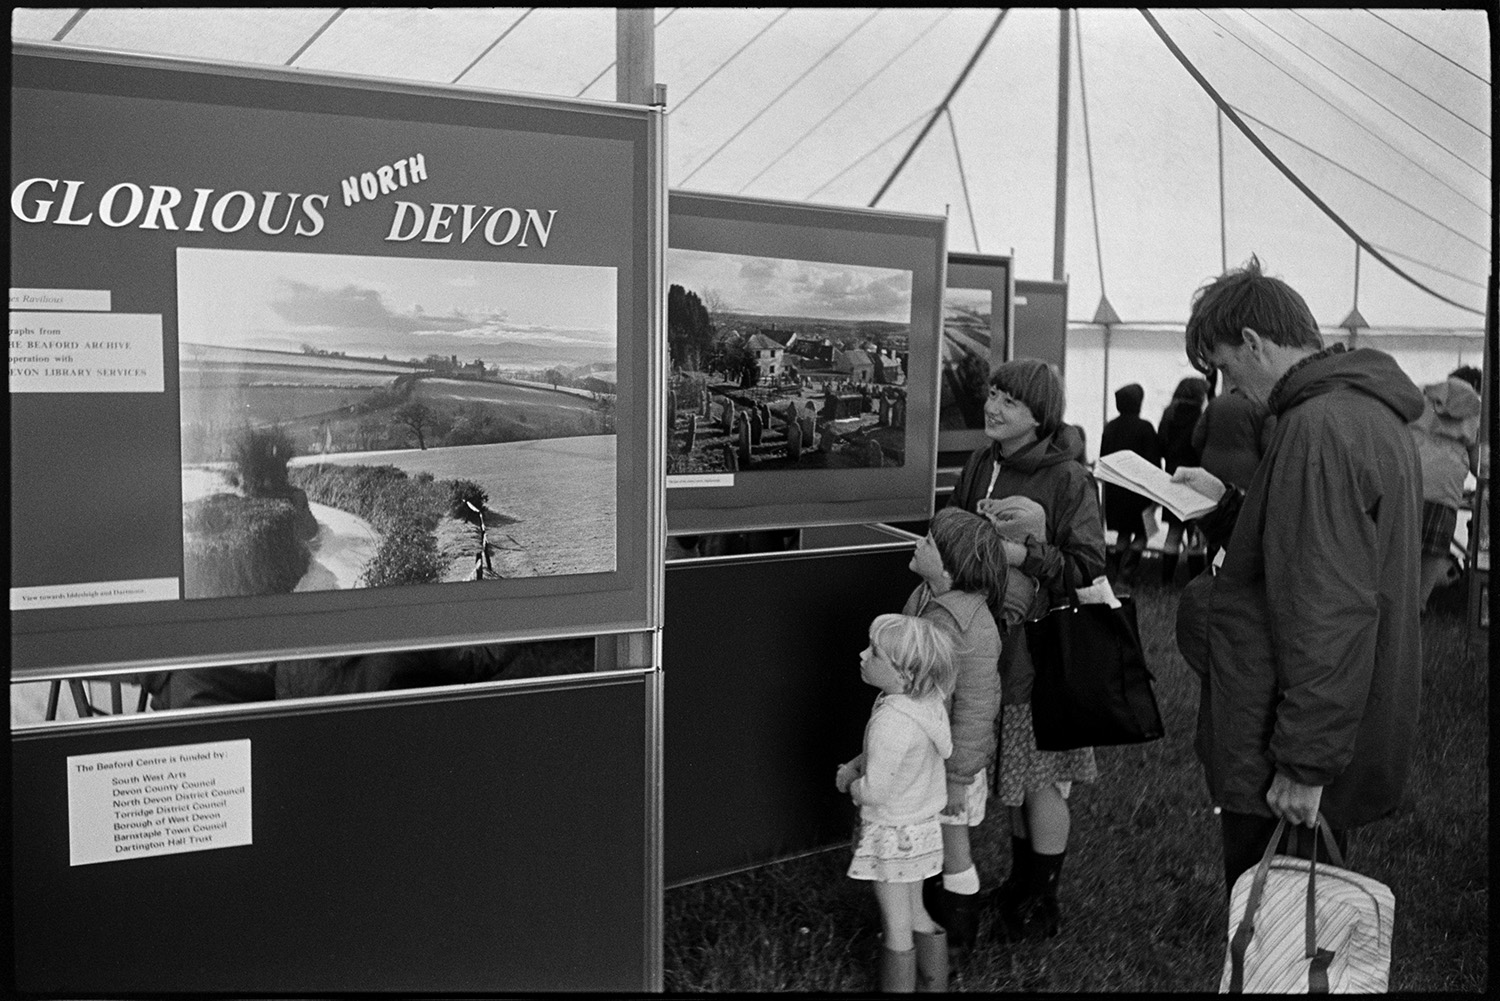 North Devon Show, prize bulls and cattle. 
[A man, woman and children looking at a display of images from the Beaford Archive, taken by James Ravilious in a tent at the North Devon Show at Alverdiscott.]